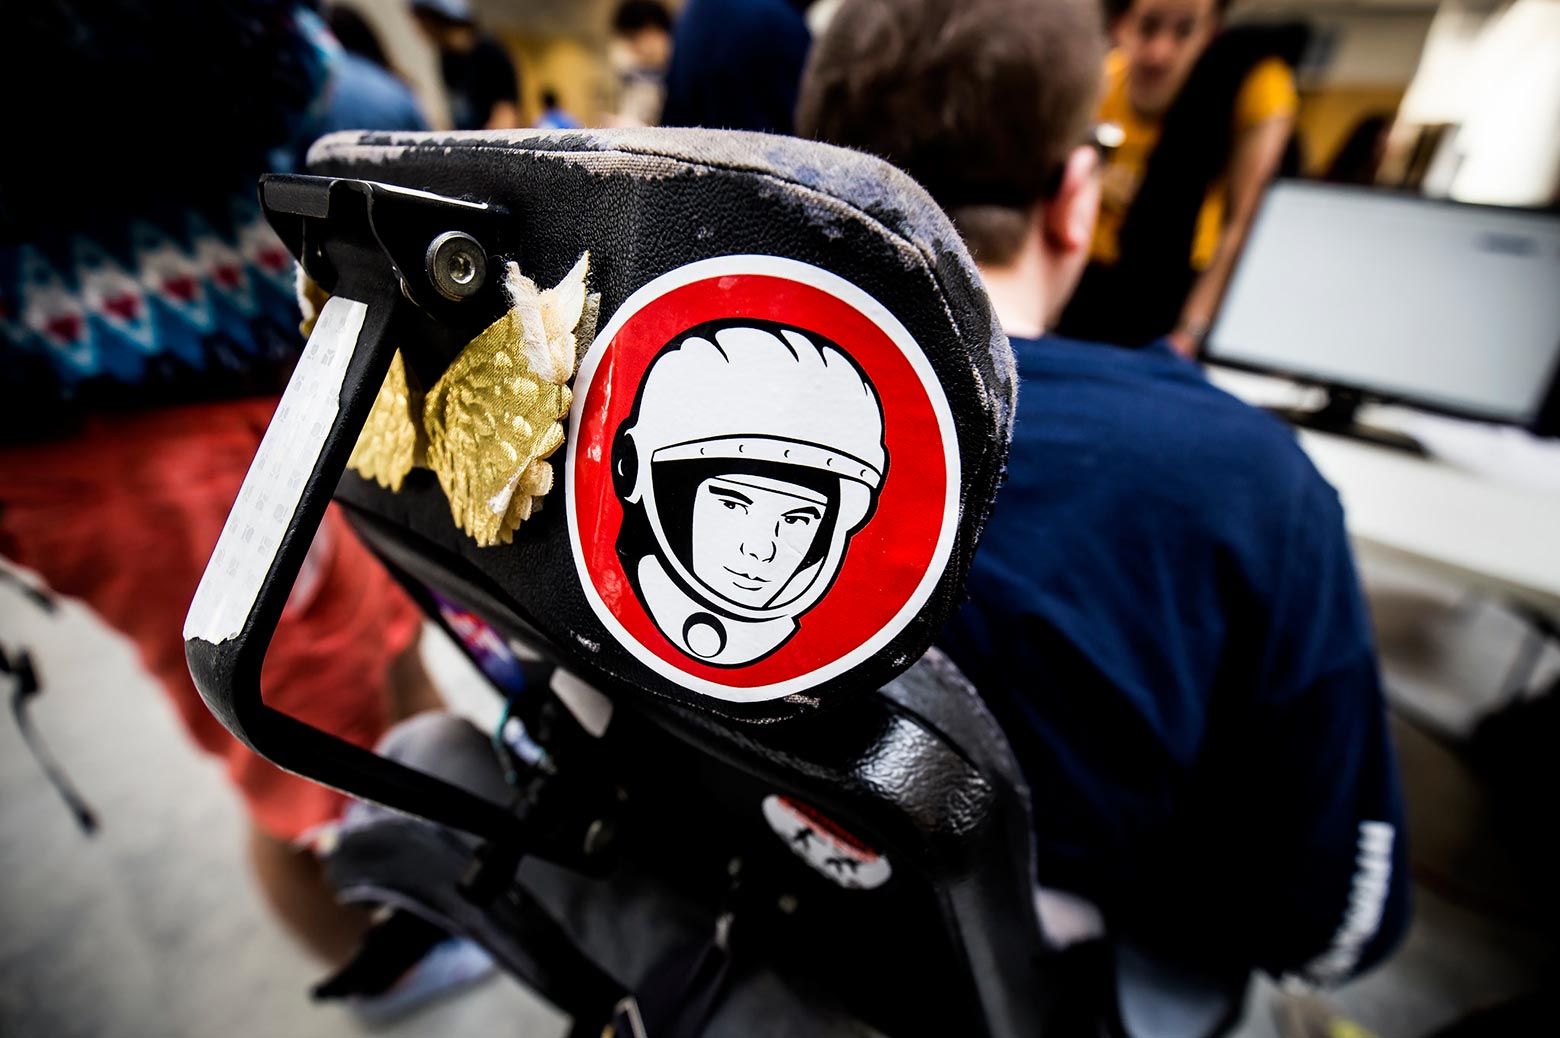 An astronaut sticker adorns the back of a disabled student's wheelchair